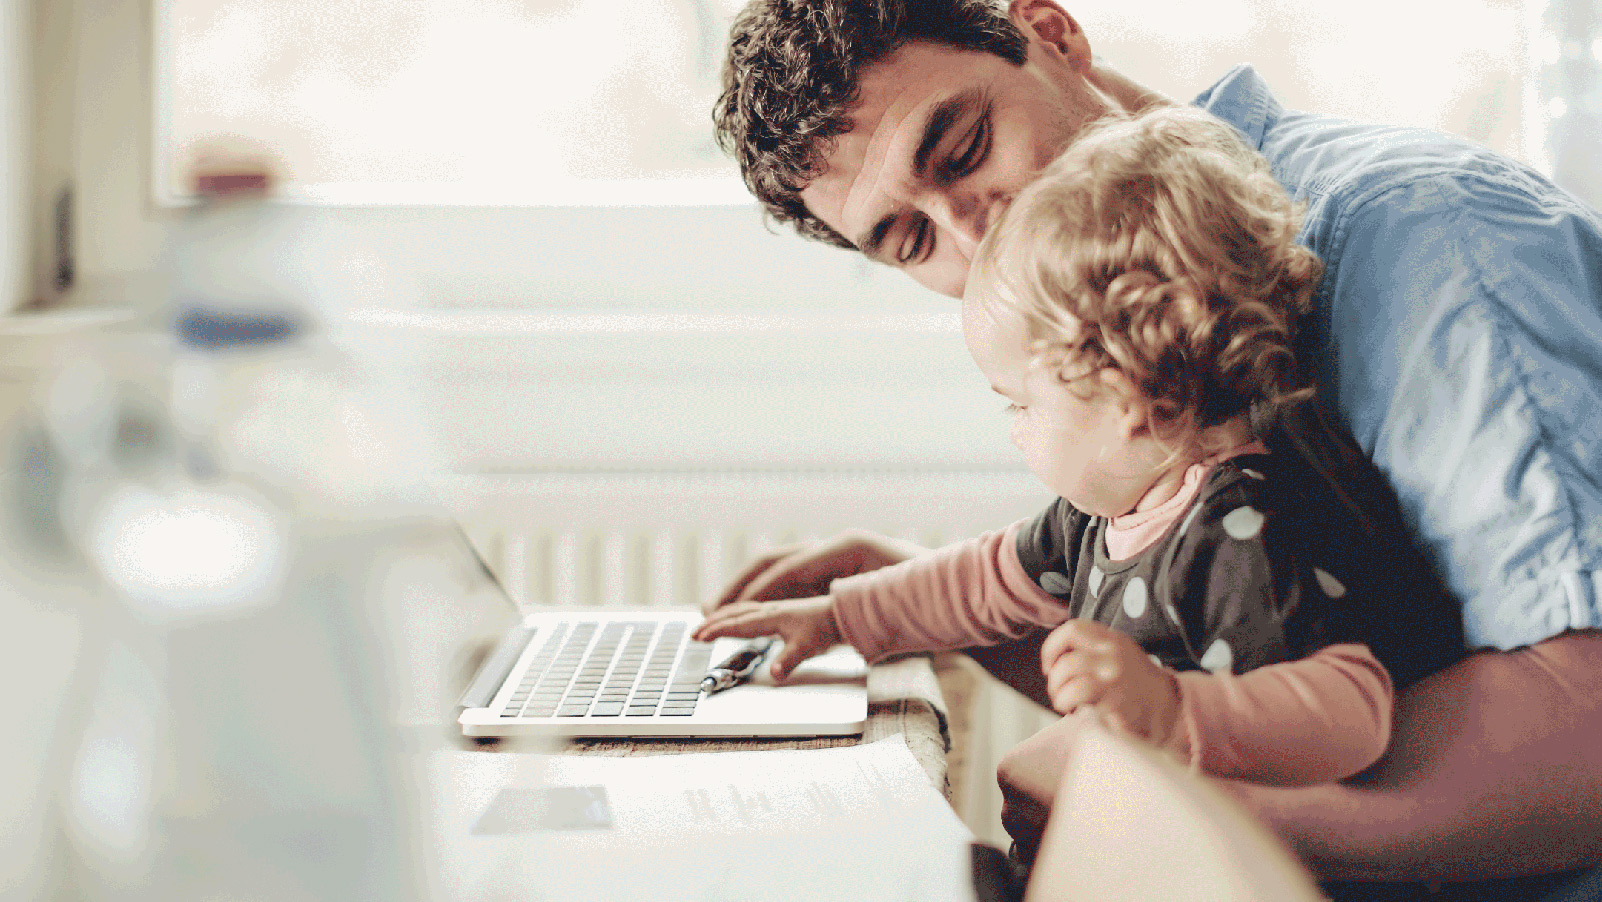 Smiling father holding his toddler at a desk with a laptop.